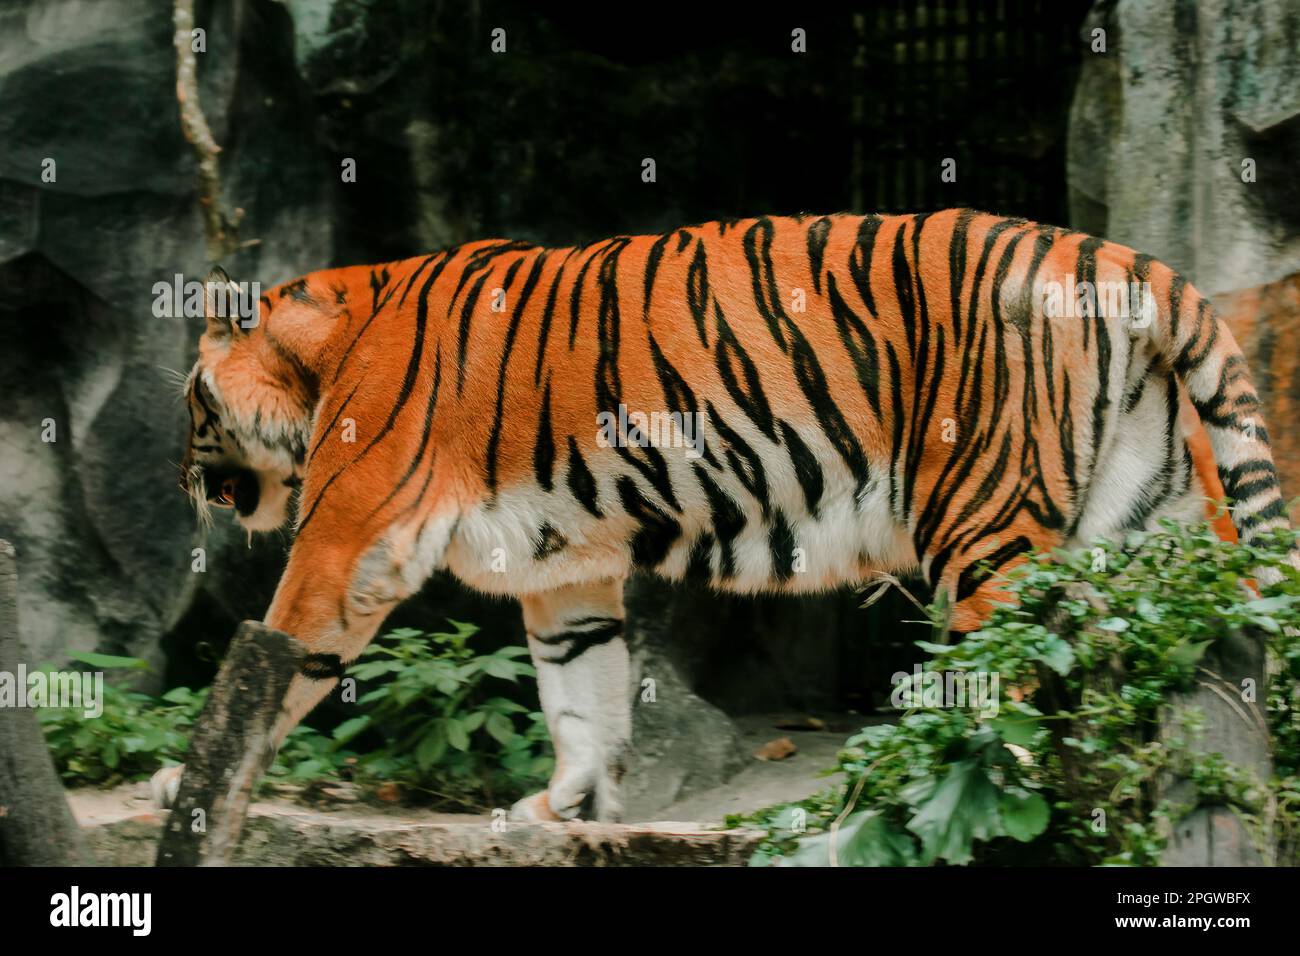 A tiger walking in an exhibit zoo enclosure That tiger It is considered a predator of prey in the animal ecosystem. Stock Photo